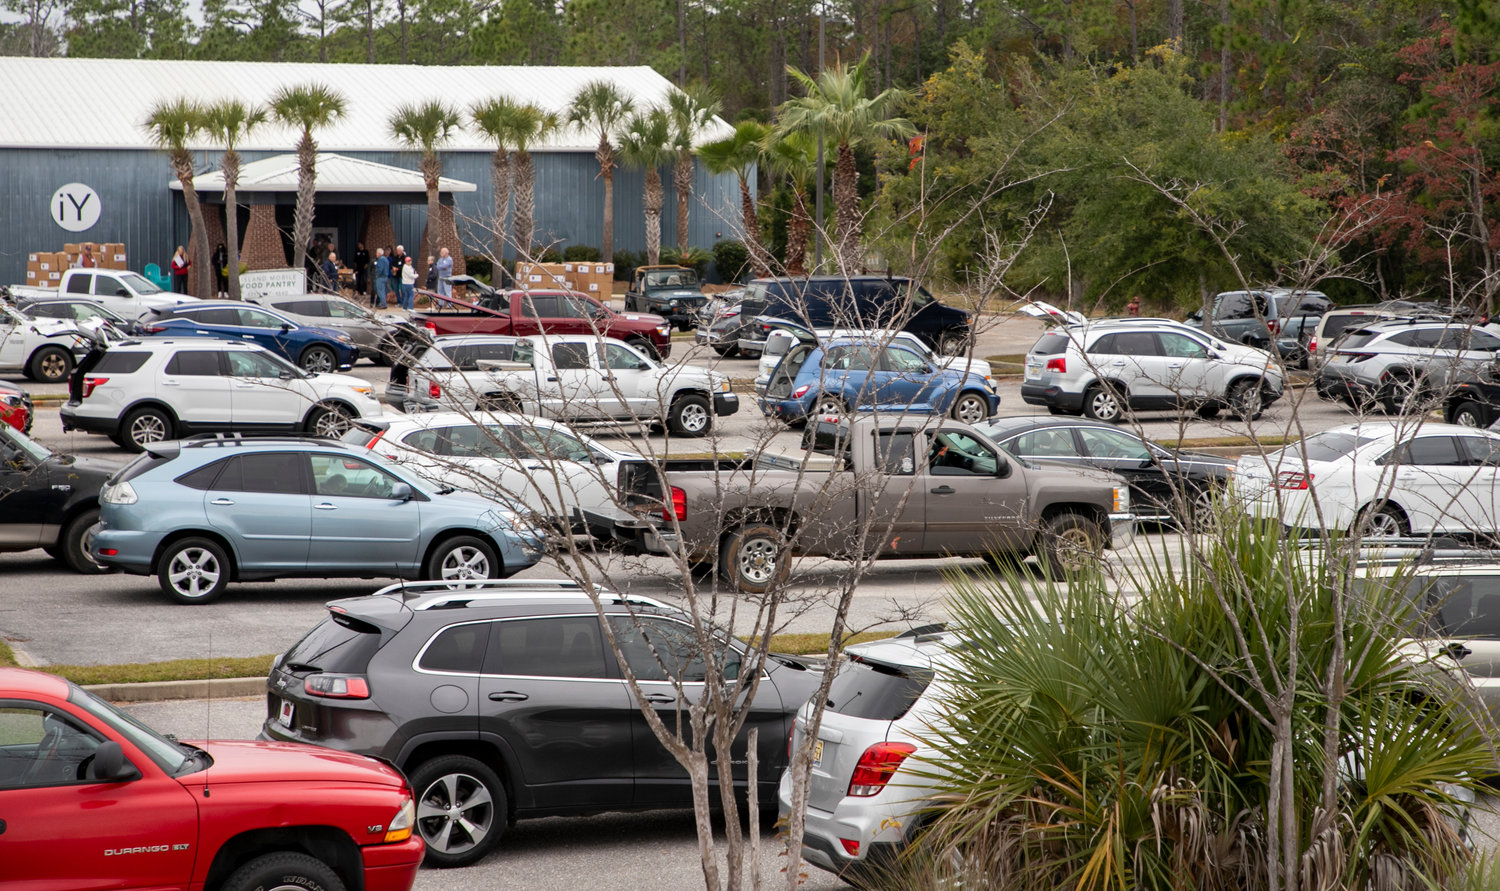 The Island Church’s parking lot was filled Saturday morning, Nov. 19, for the ninth annual Thanksgiving food distribution hosted by the Island Mobile Food Pantry. The church saw its largest turnout yet with 222 families signed up.